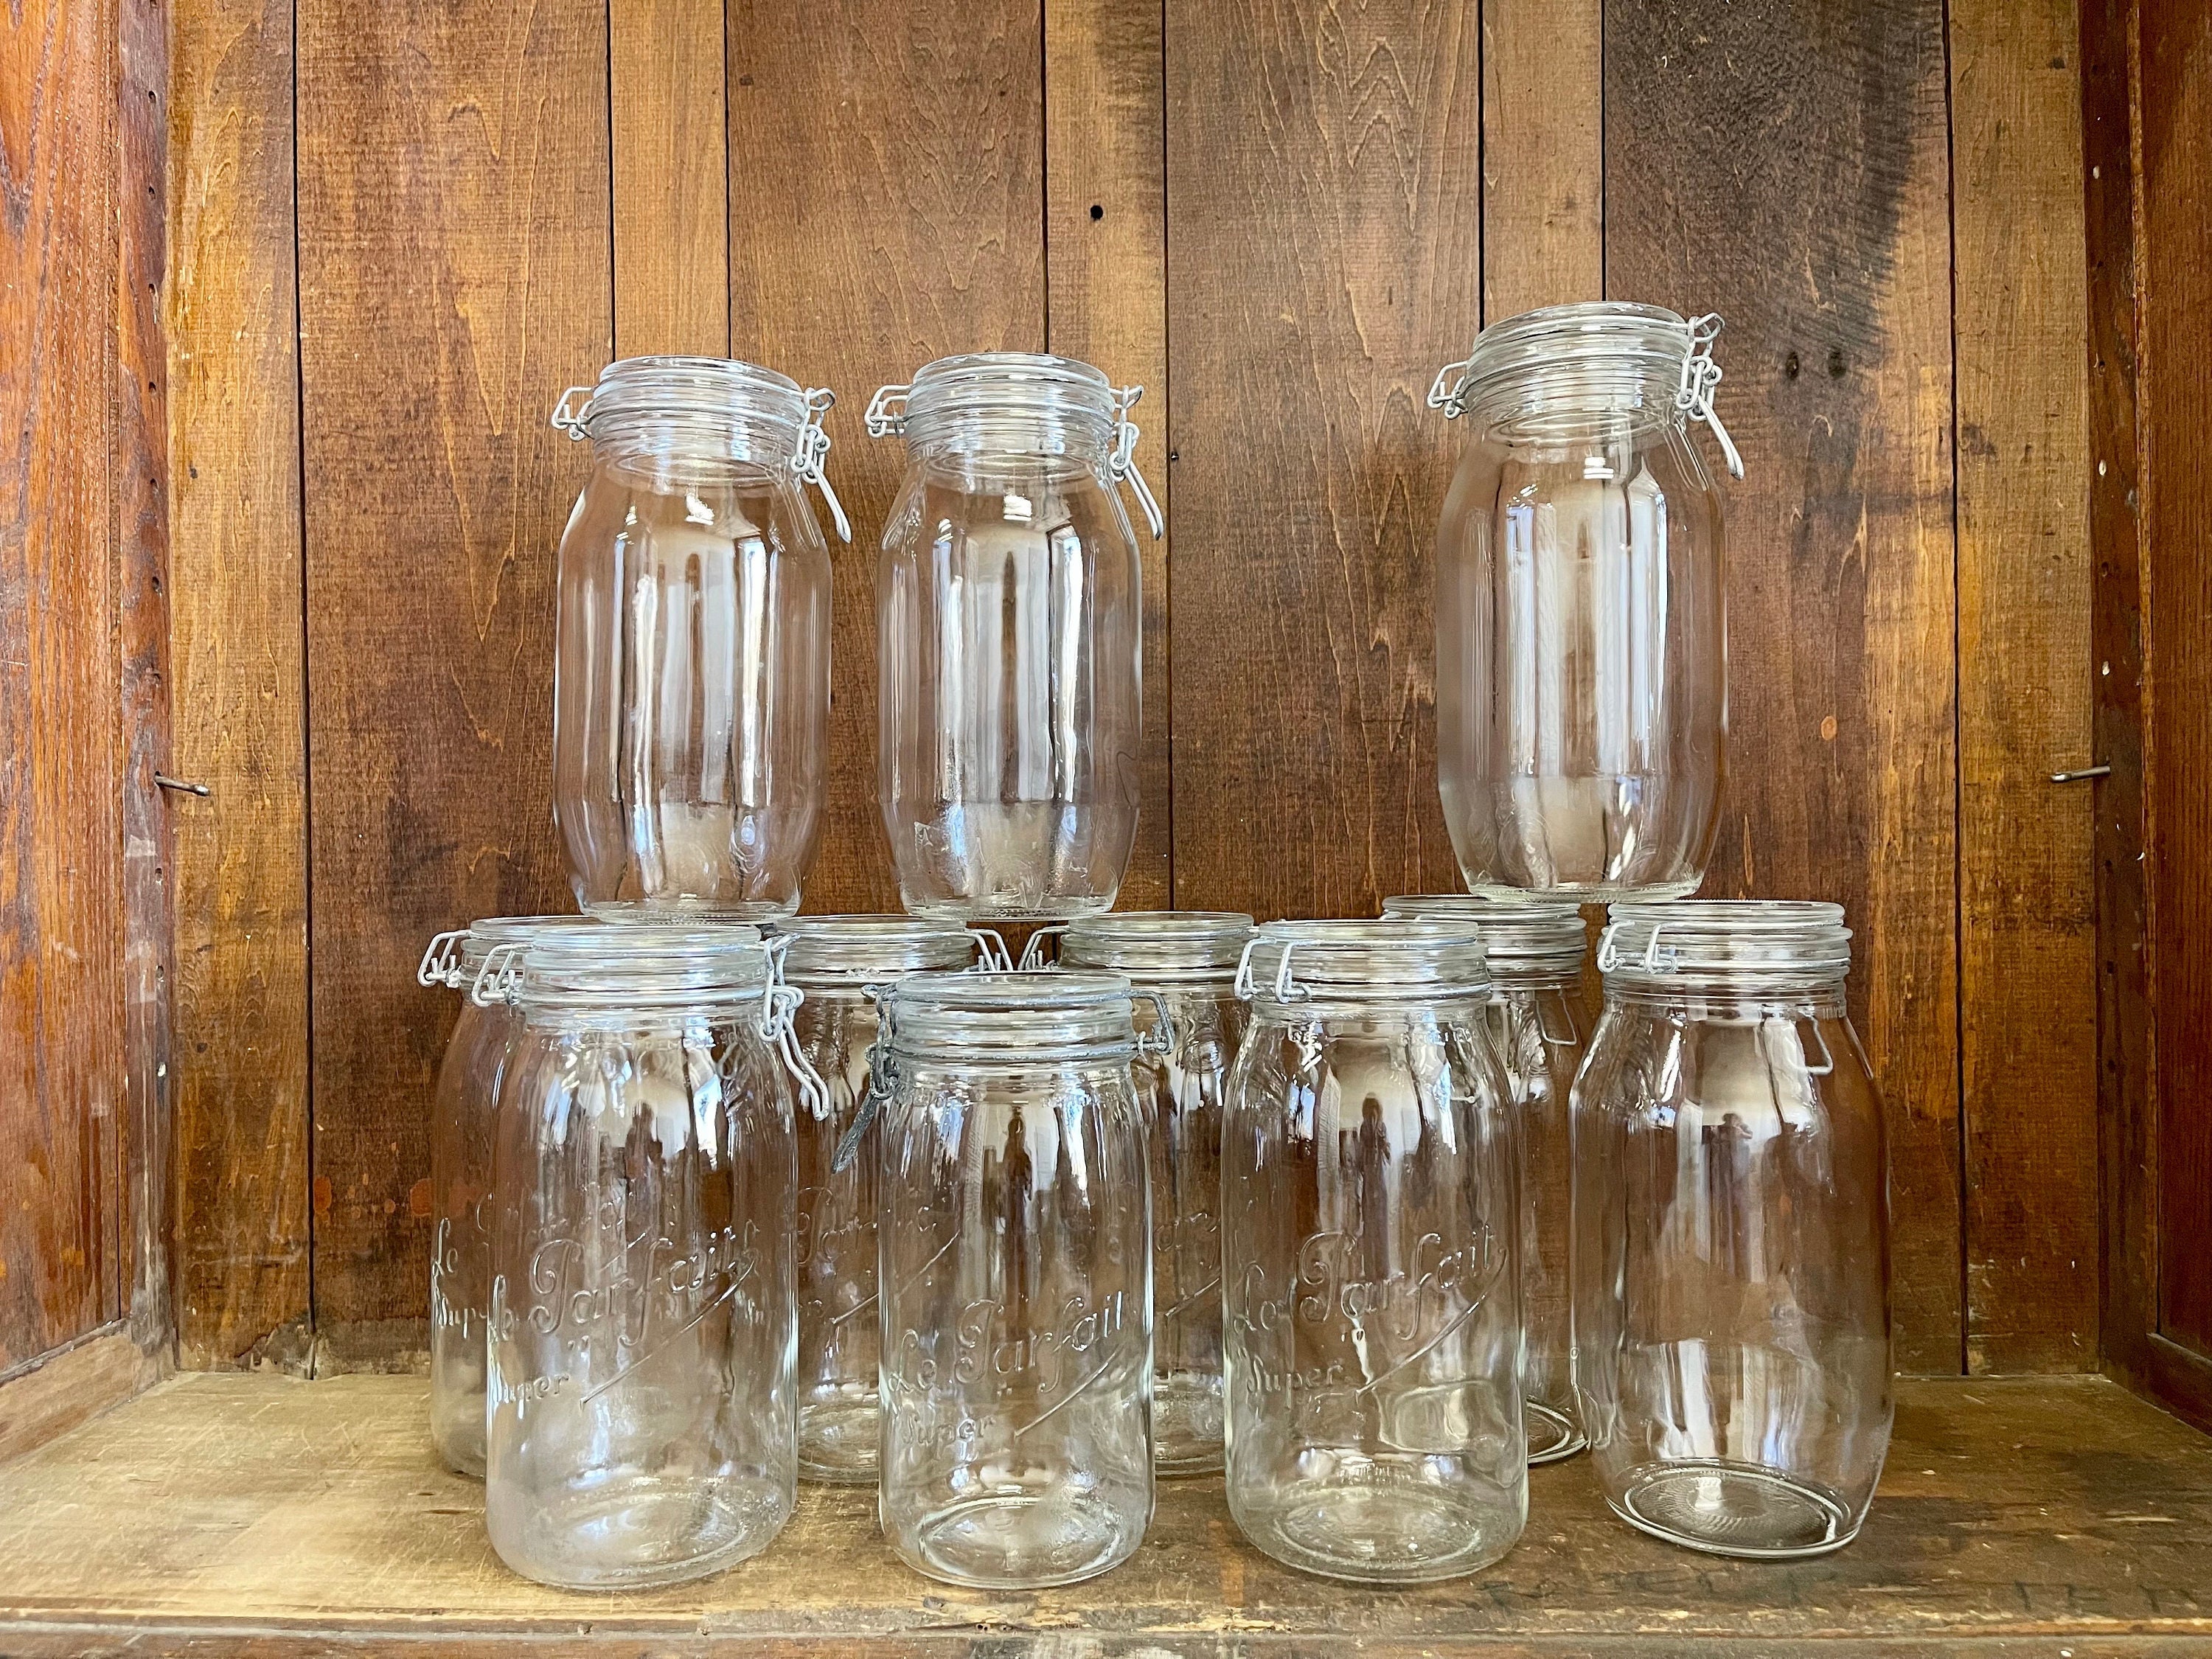 Used Weck Jars For Sale - One Hundred Dollars a Month